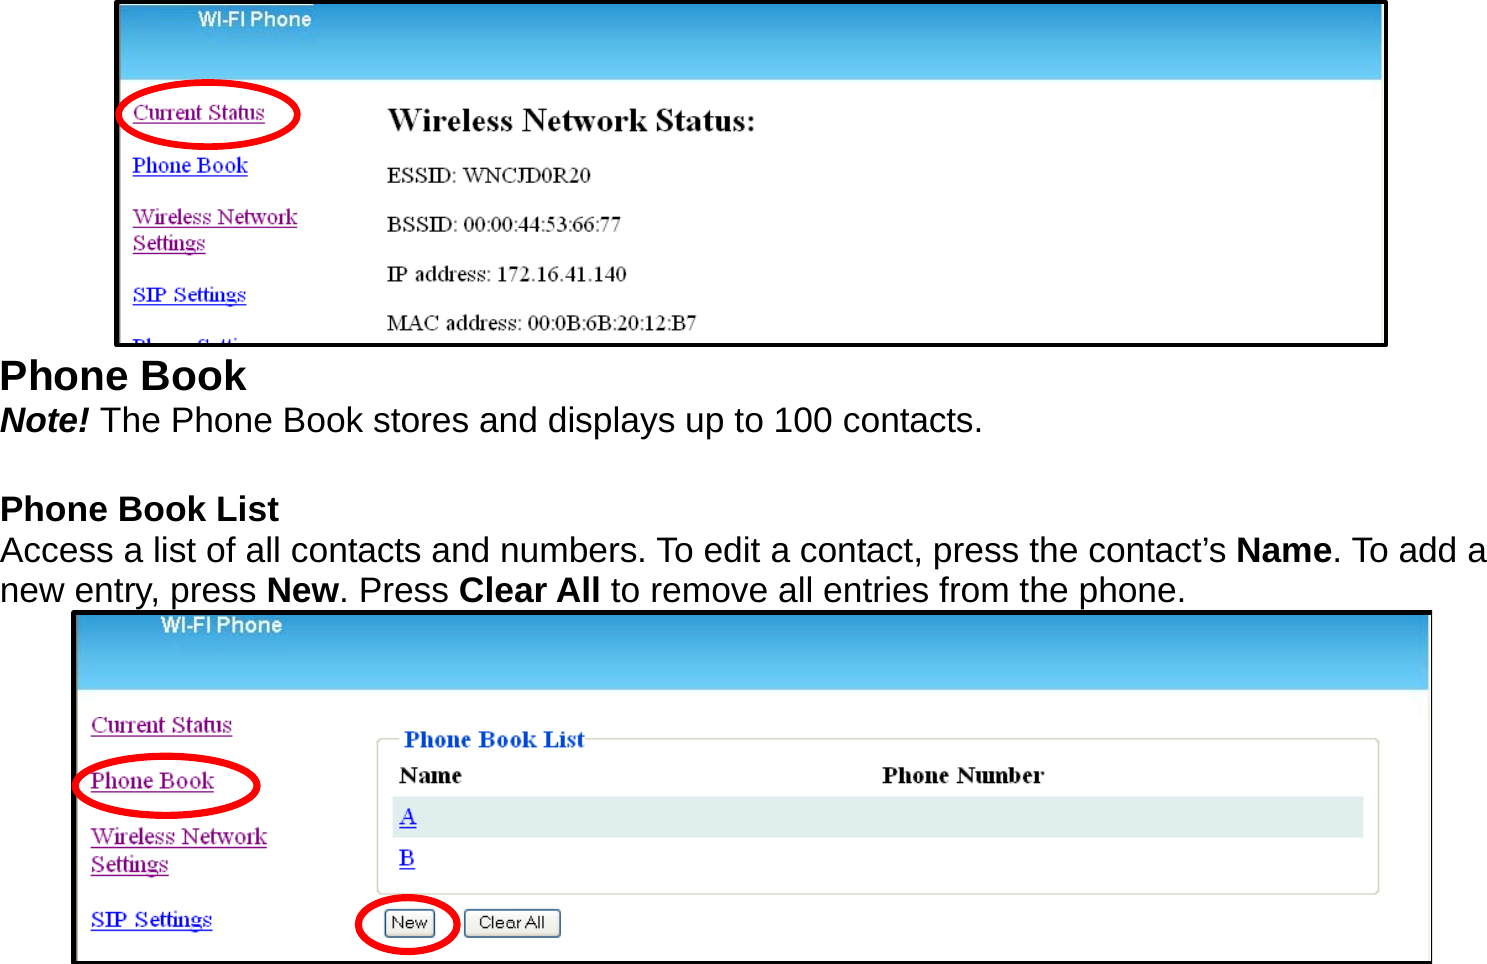  Phone Book Note! The Phone Book stores and displays up to 100 contacts.  Phone Book List Access a list of all contacts and numbers. To edit a contact, press the contact’s Name. To add a new entry, press New. Press Clear All to remove all entries from the phone.  